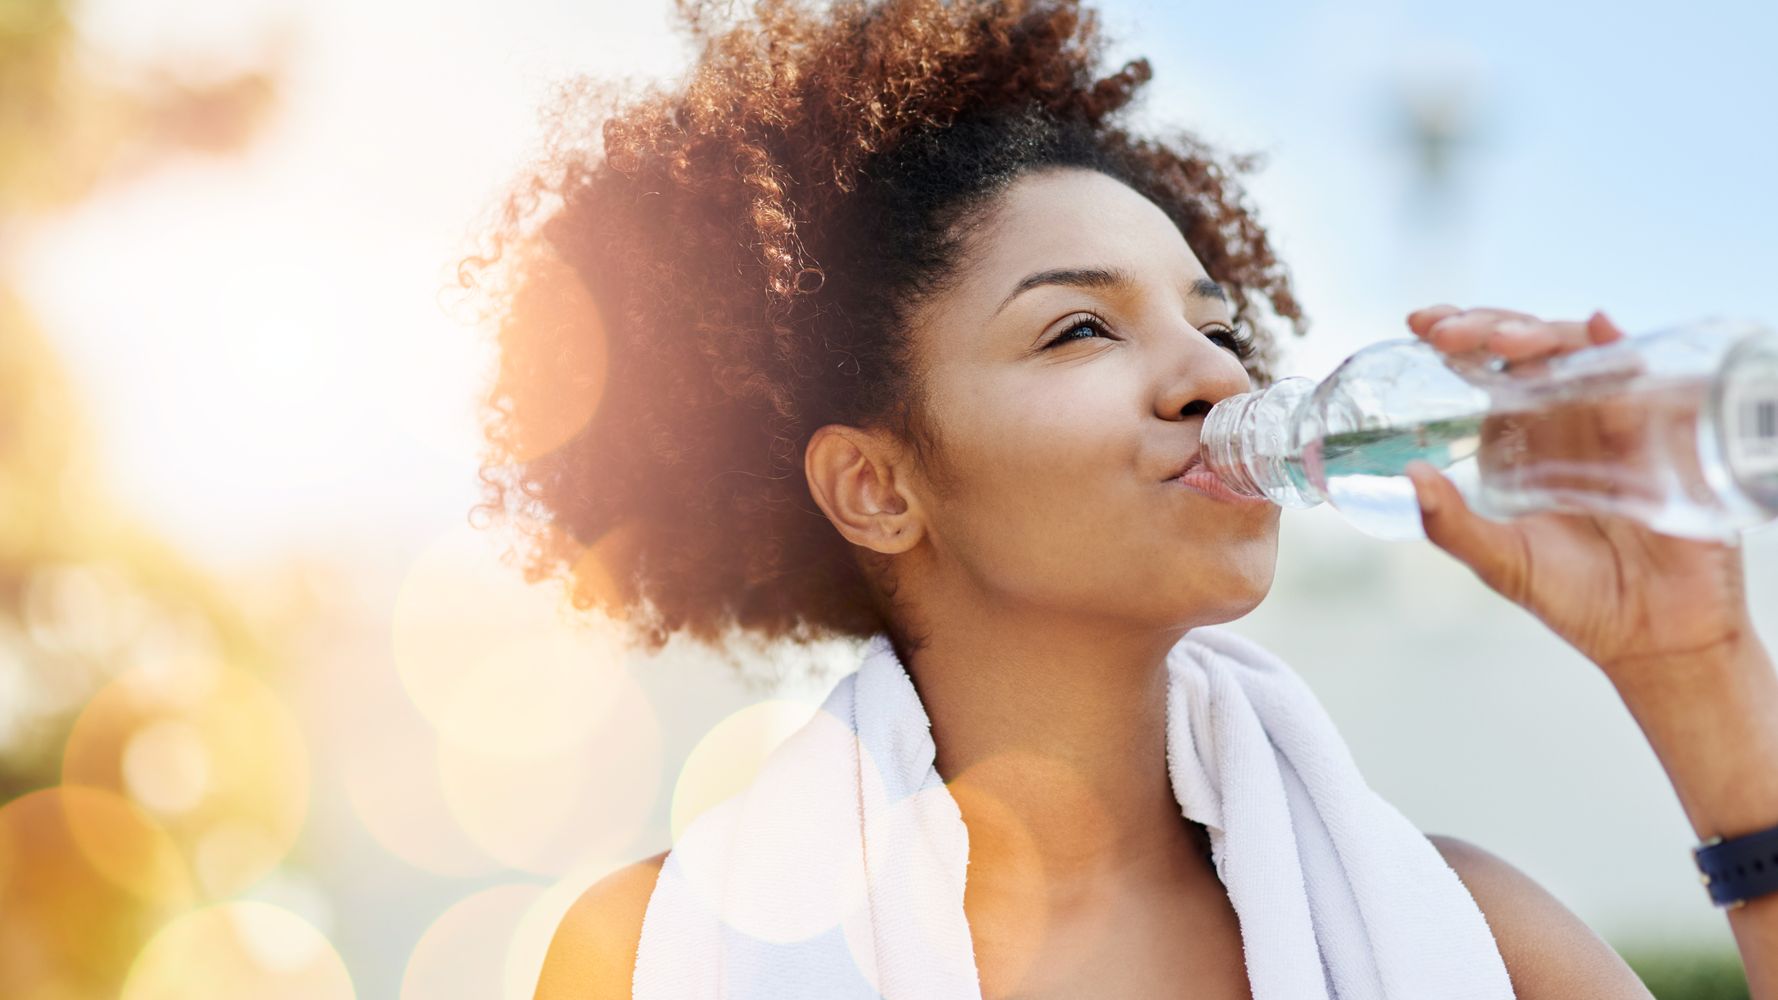 Is raw water healthy for you? Top water myths busted